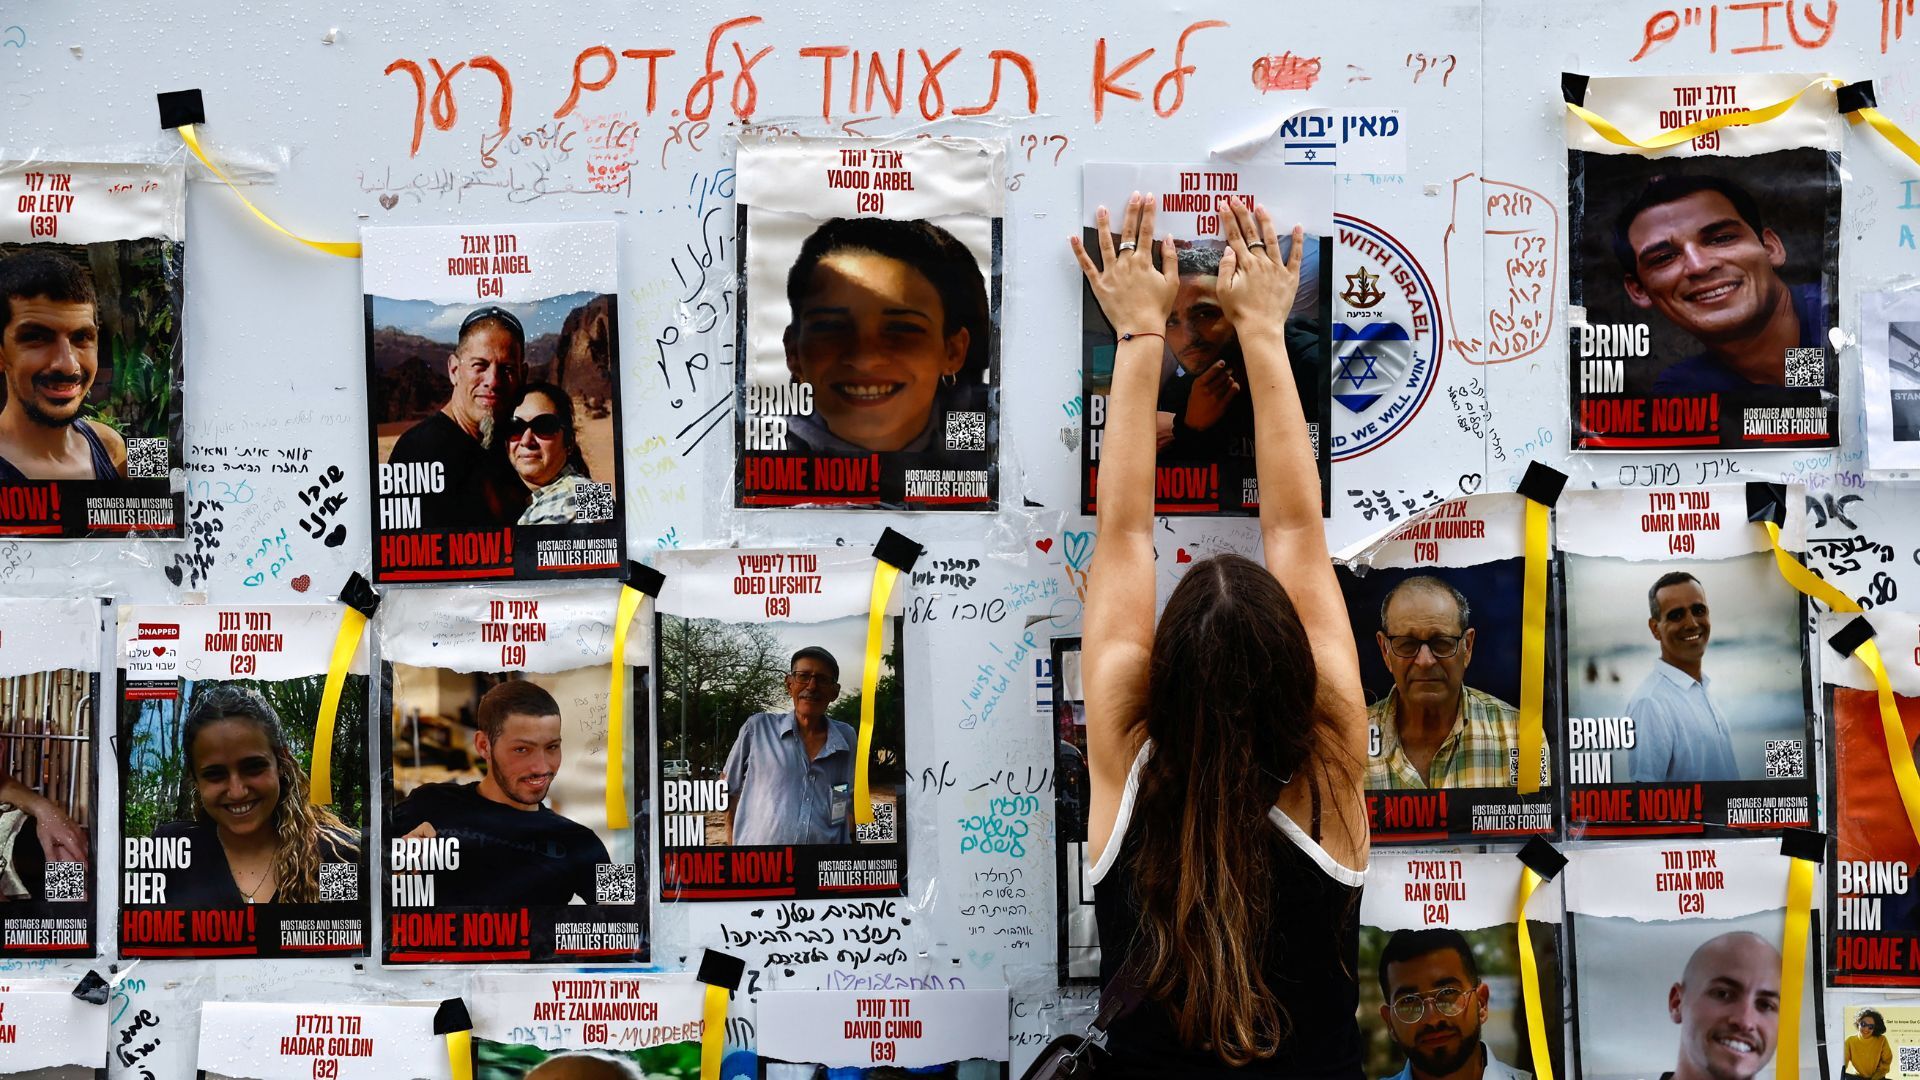 What do Israelis think of their gov’t handling of the captives’ crisis? | Israel-Palestine conflict